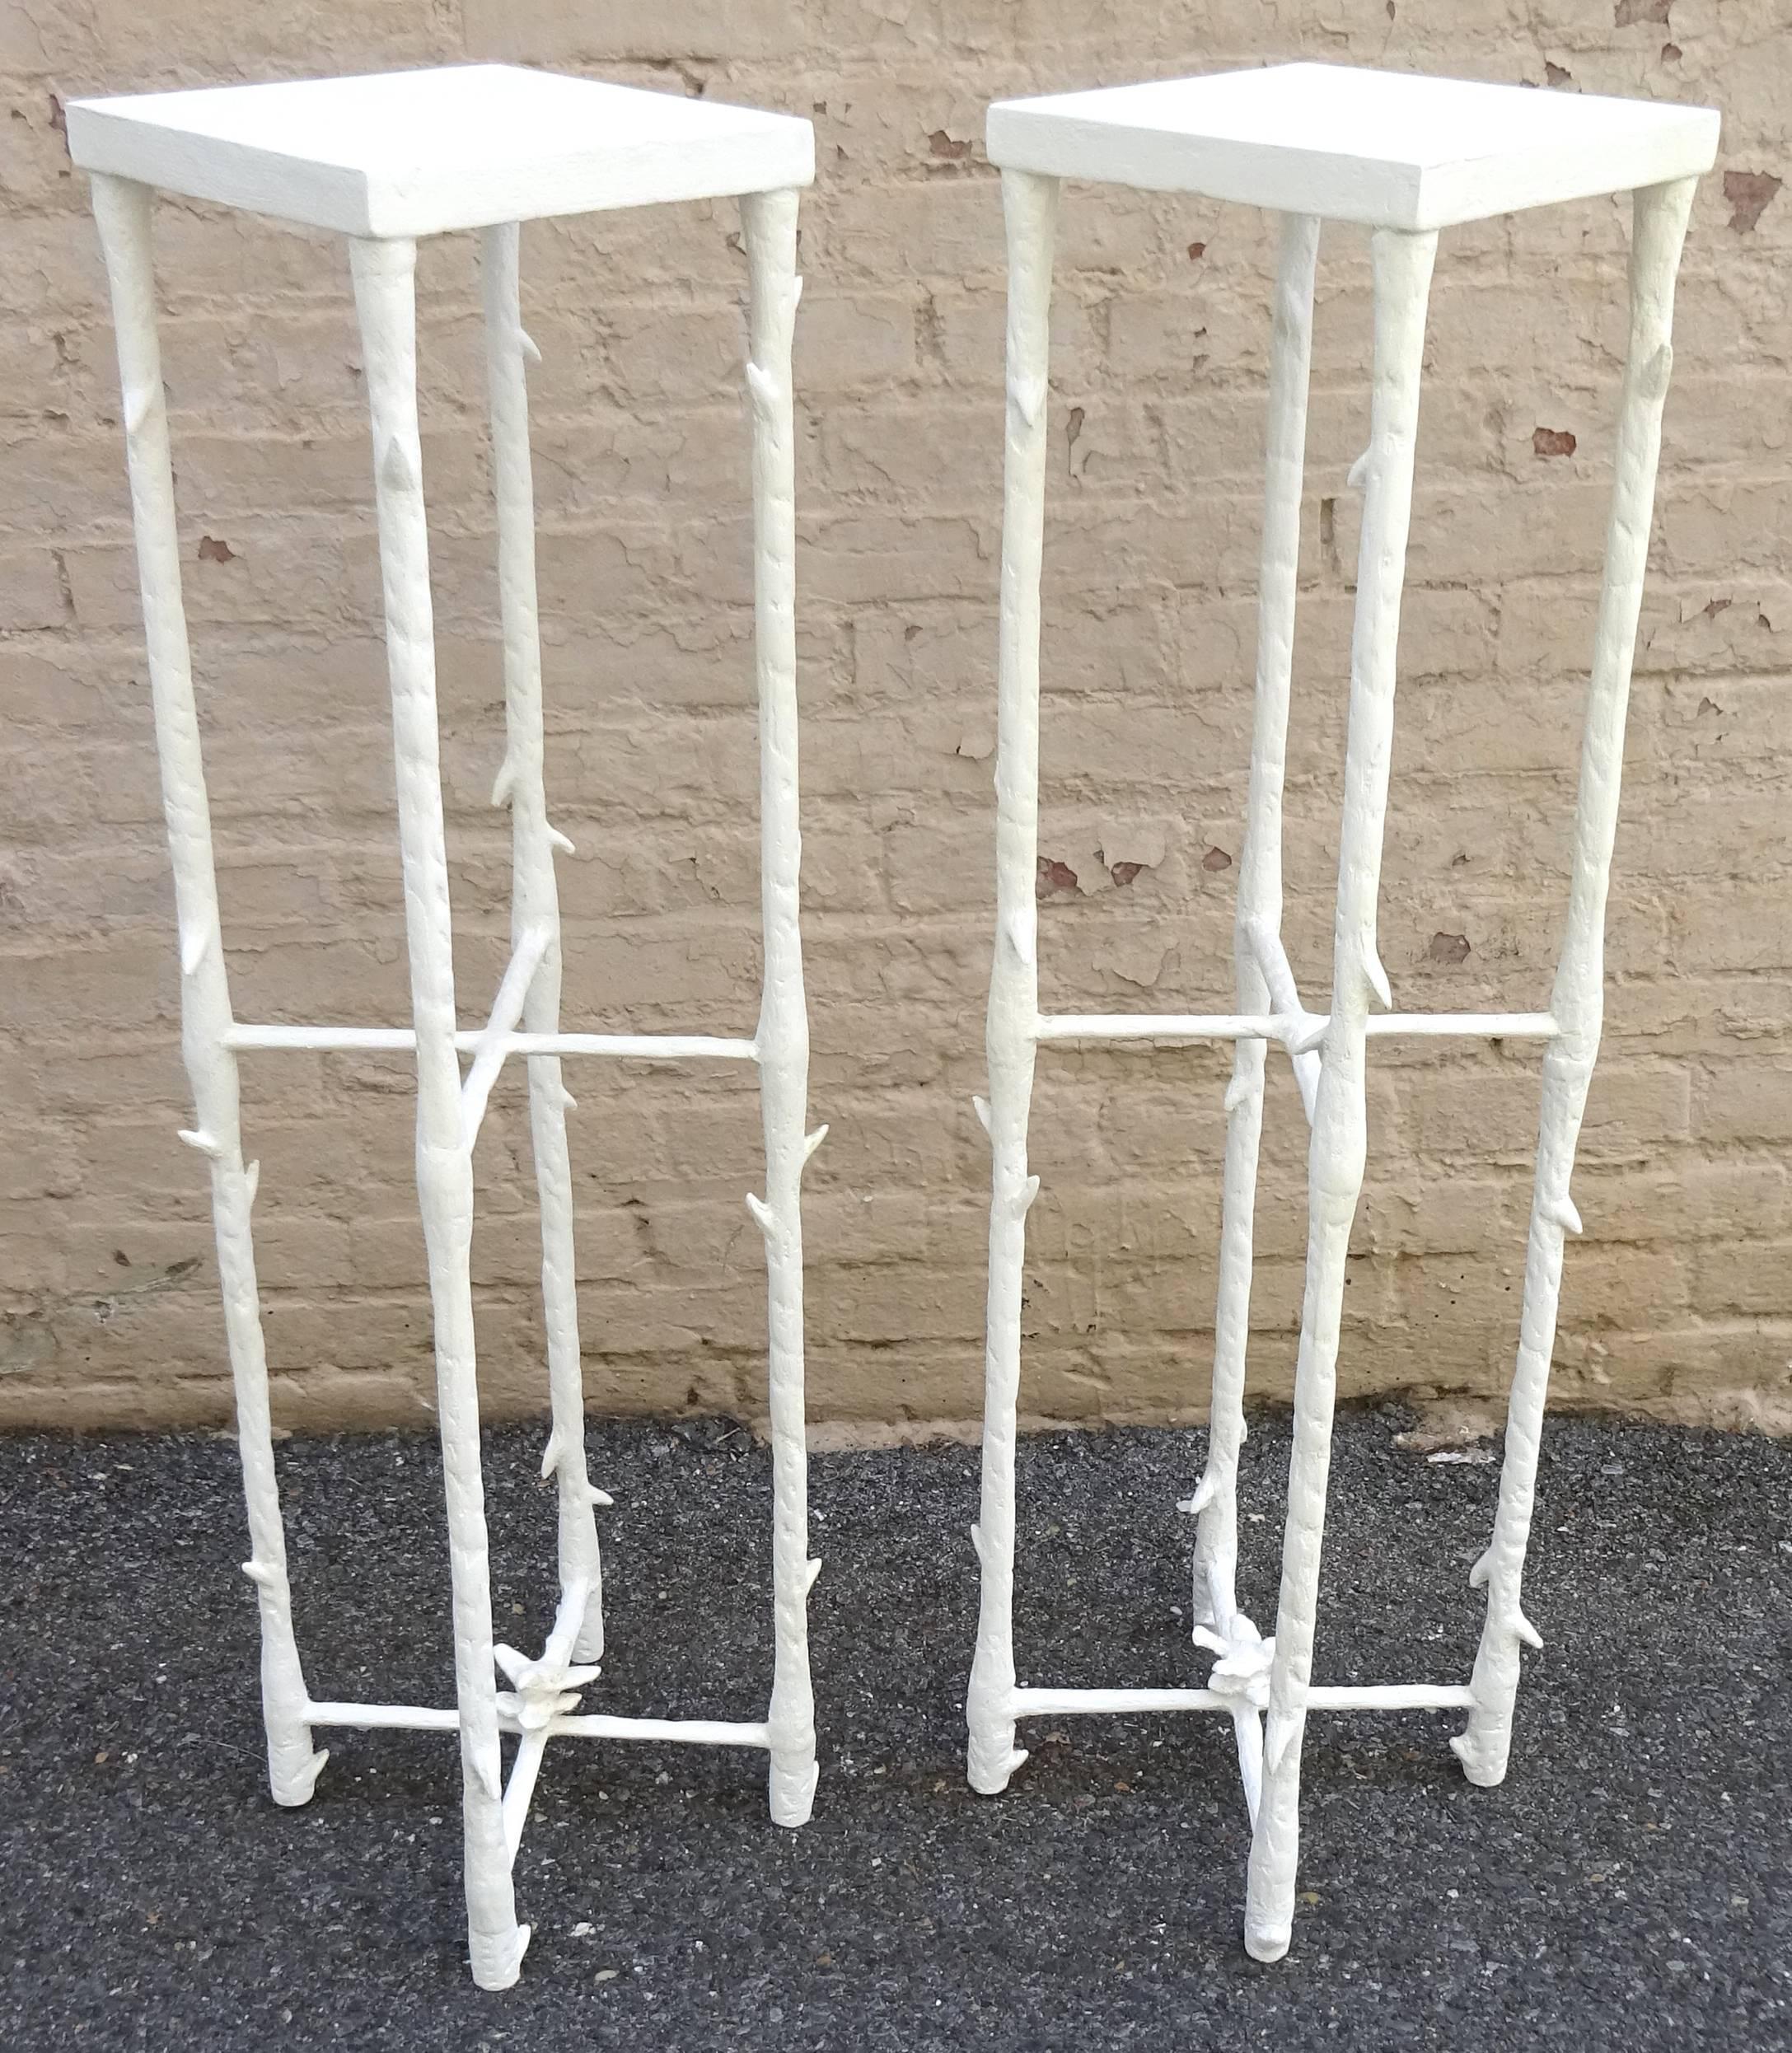 American Tall Sculptural Pair of 1960s Plaster White Pedestals after Giacometti